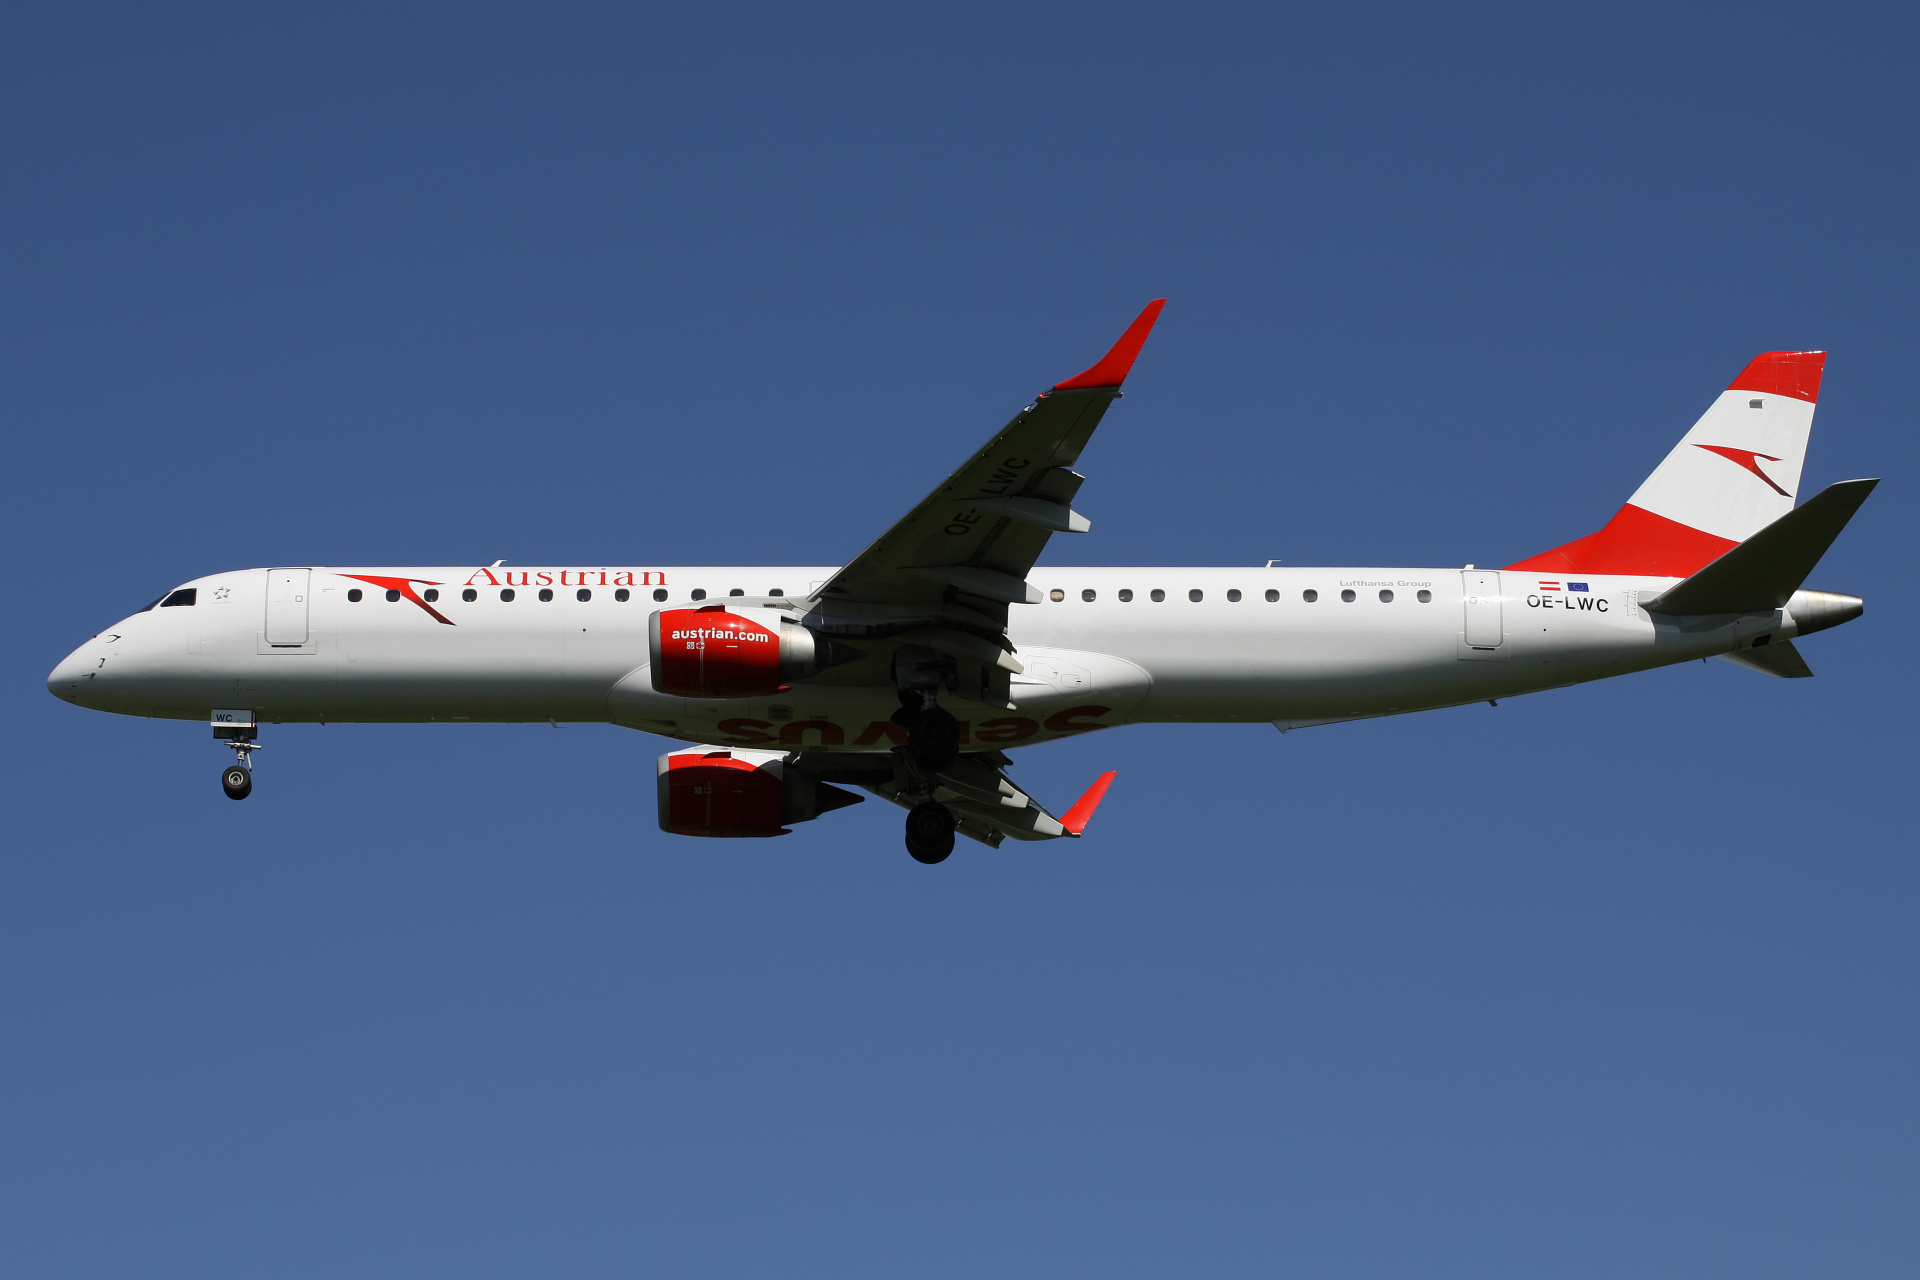 OE-LWC (Aircraft » EPWA Spotting » Embraer E195 » Austrian Airlines)